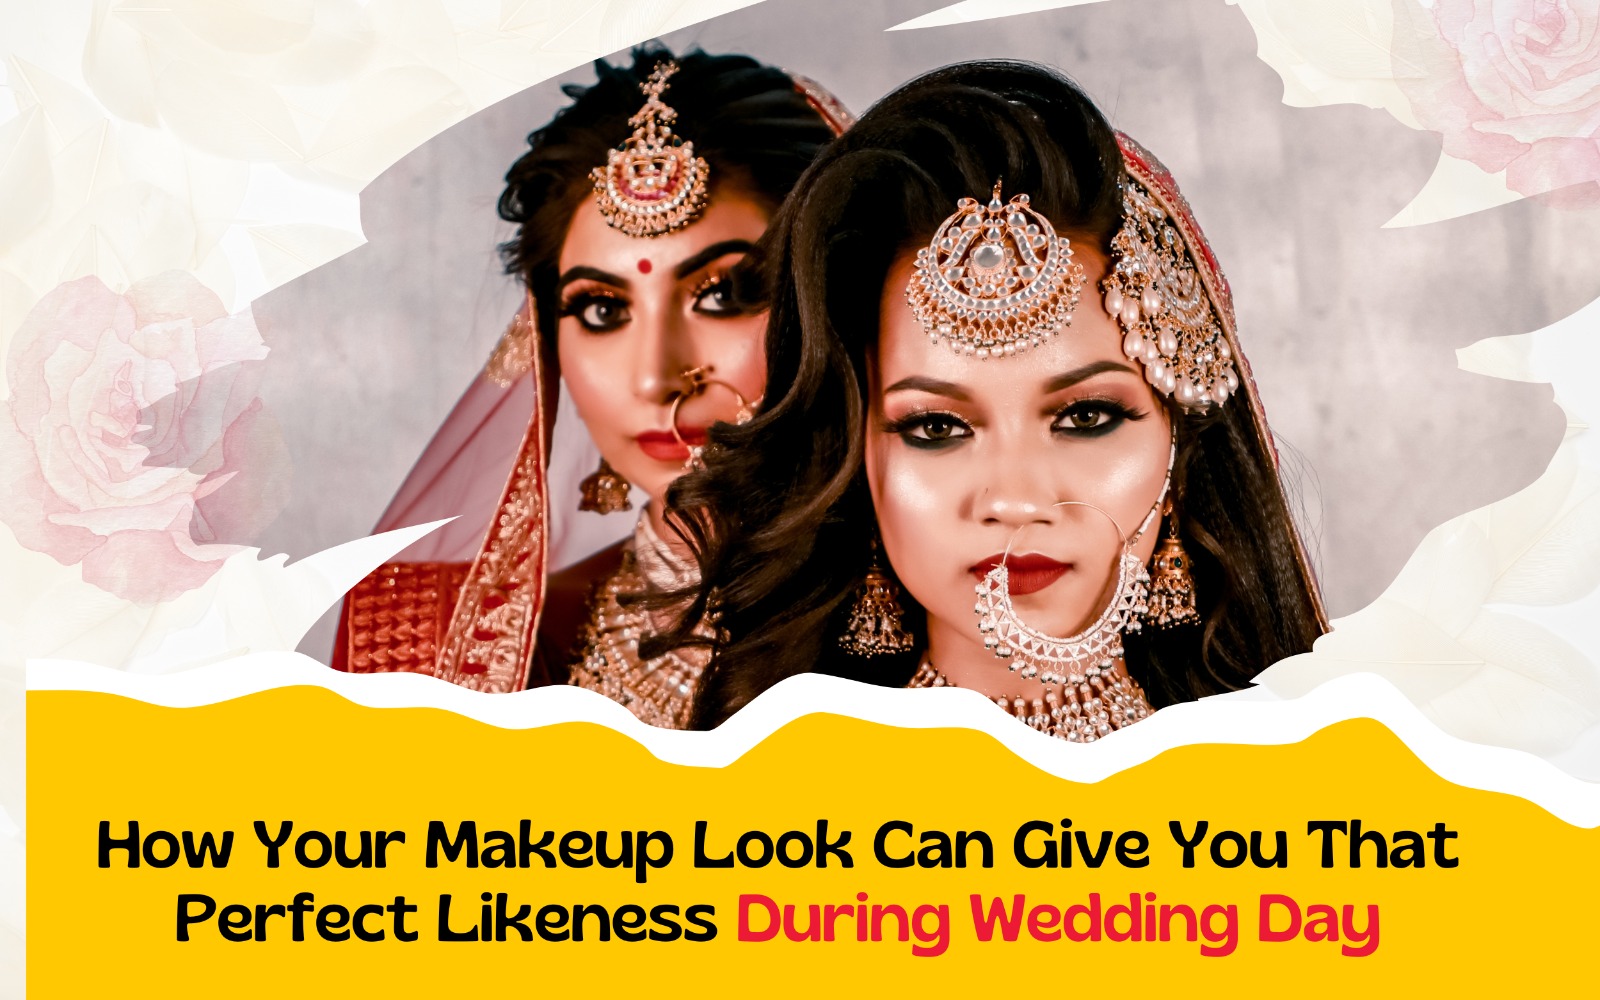 How Your Makeup Look Can Give You That Perfect Likeness During Wedding Day.jpeg